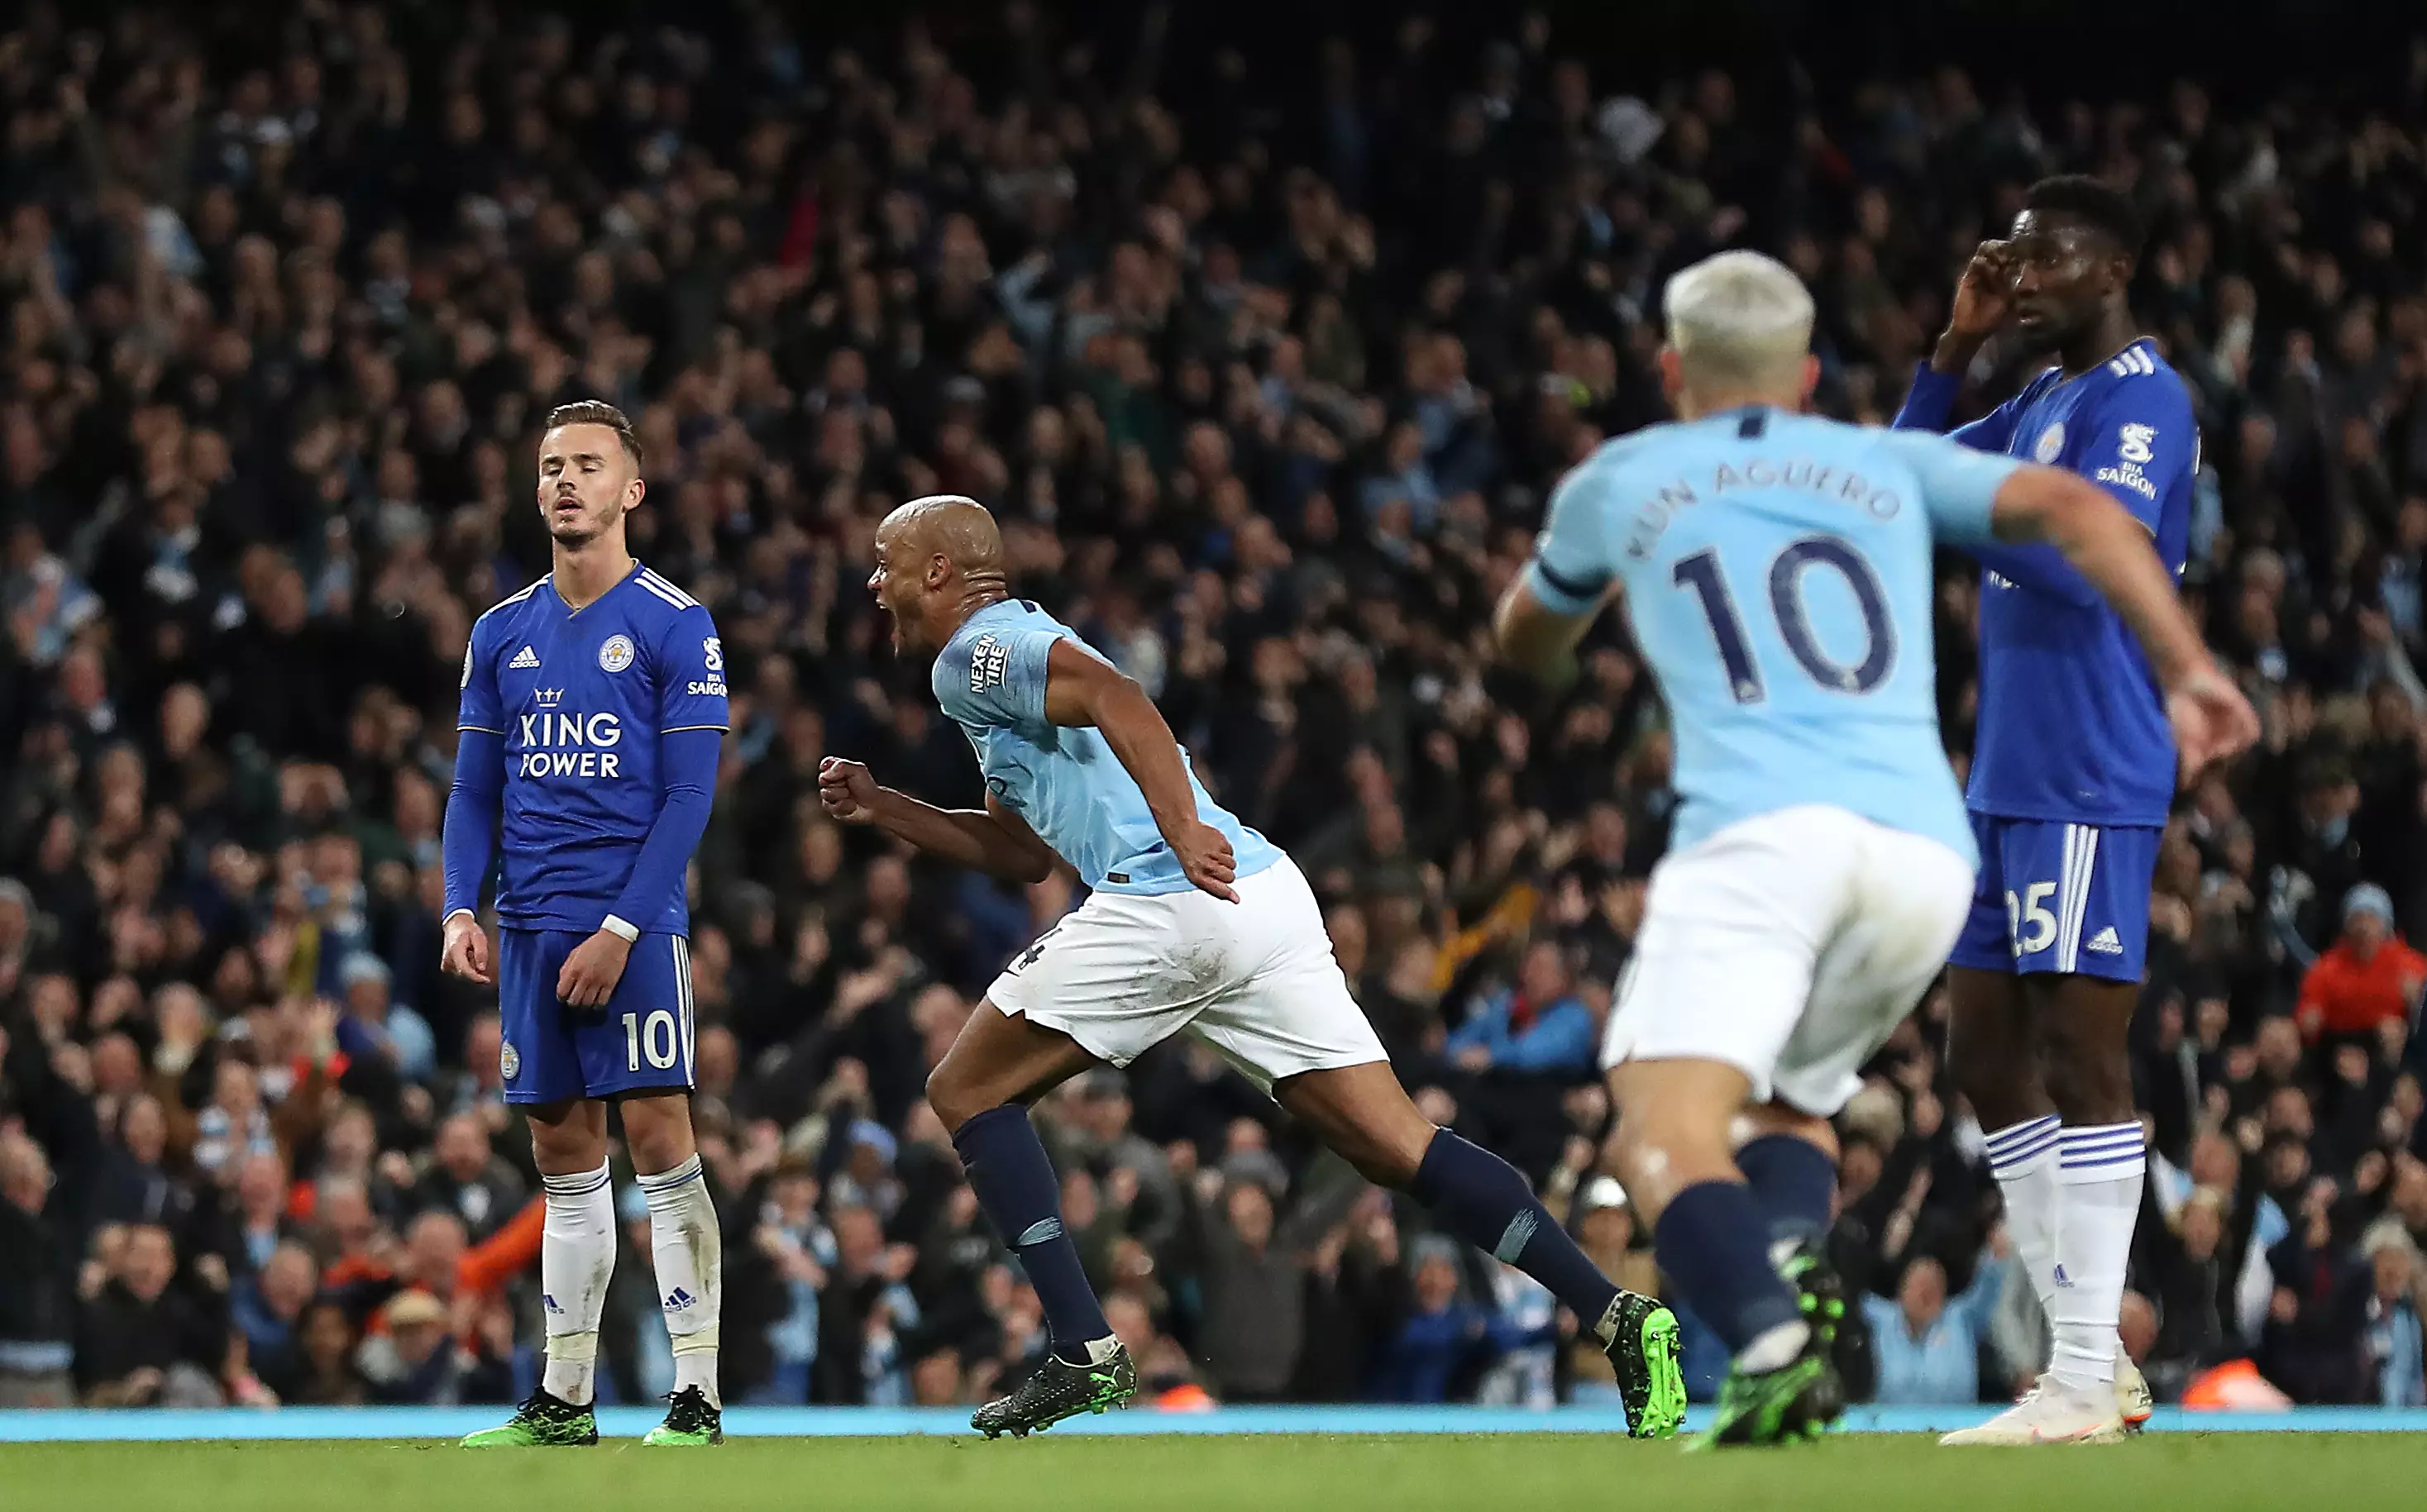 Vincent Kompany's strike against Leicester virtually ended Liverpool's title pursuit and meant all their eggs were in the Champions League basket